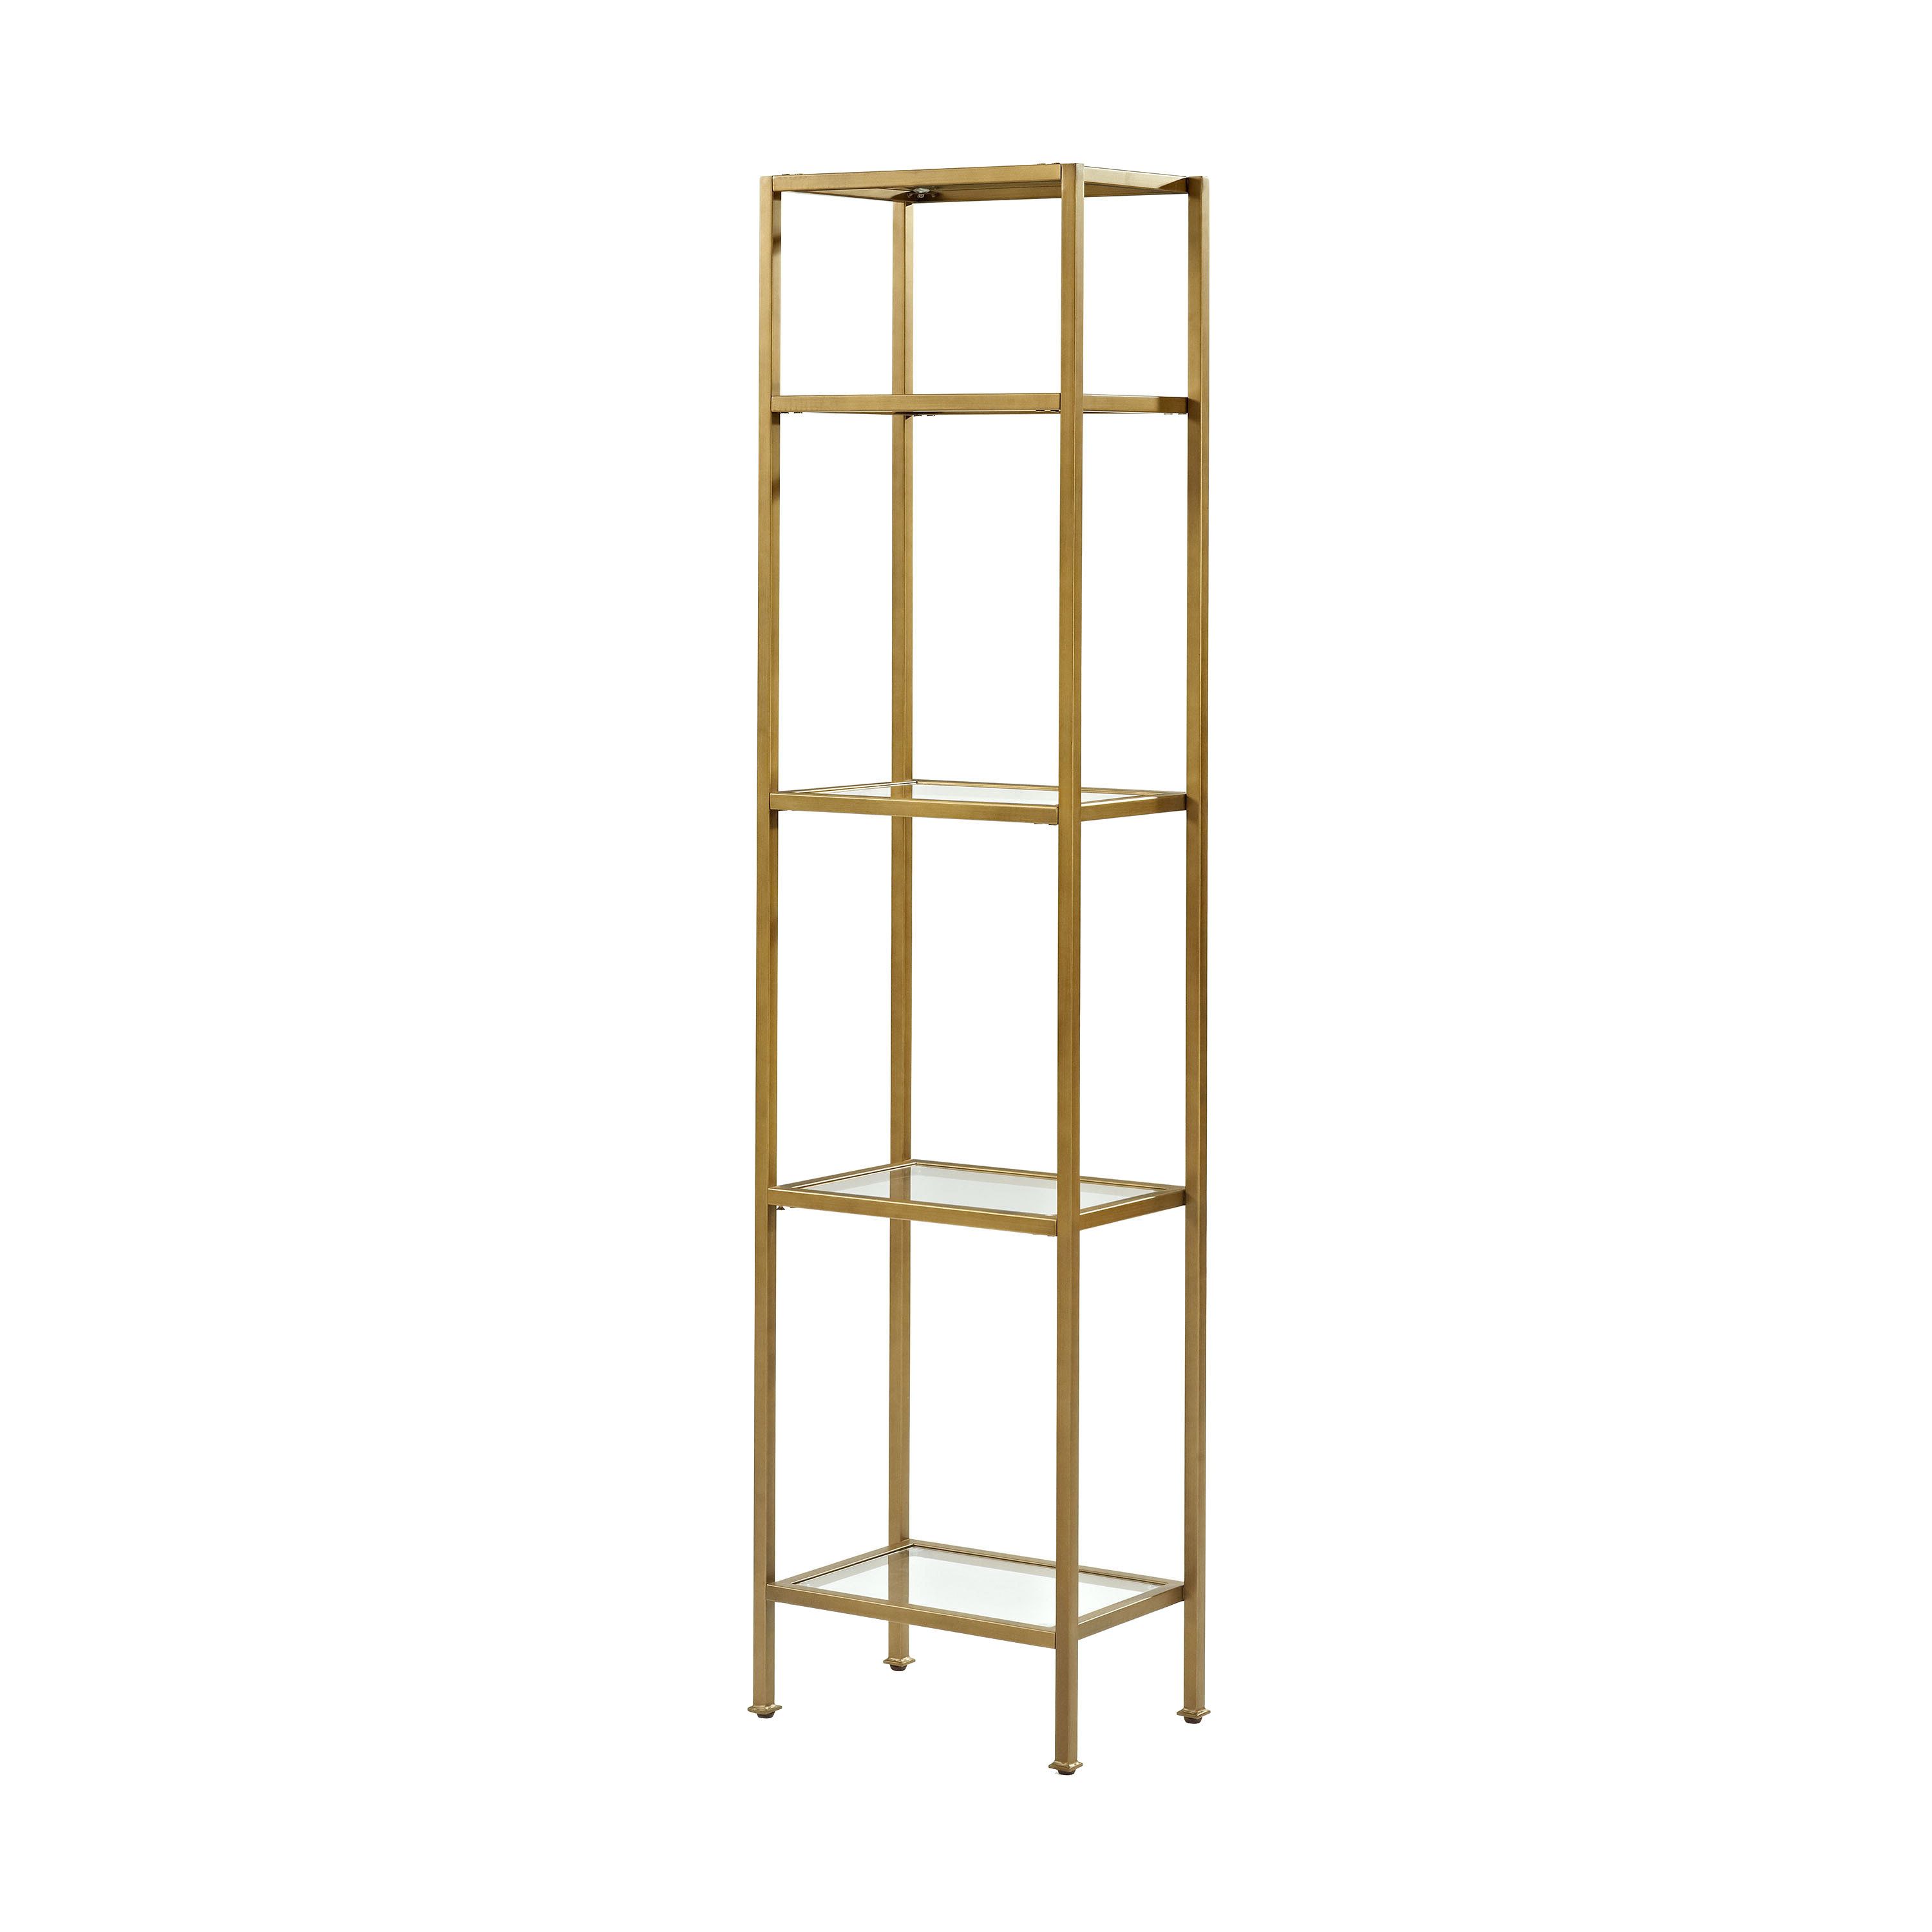 Joss & Main Throughout Well Liked Buchanan Etagere Bookcases (View 5 of 20)